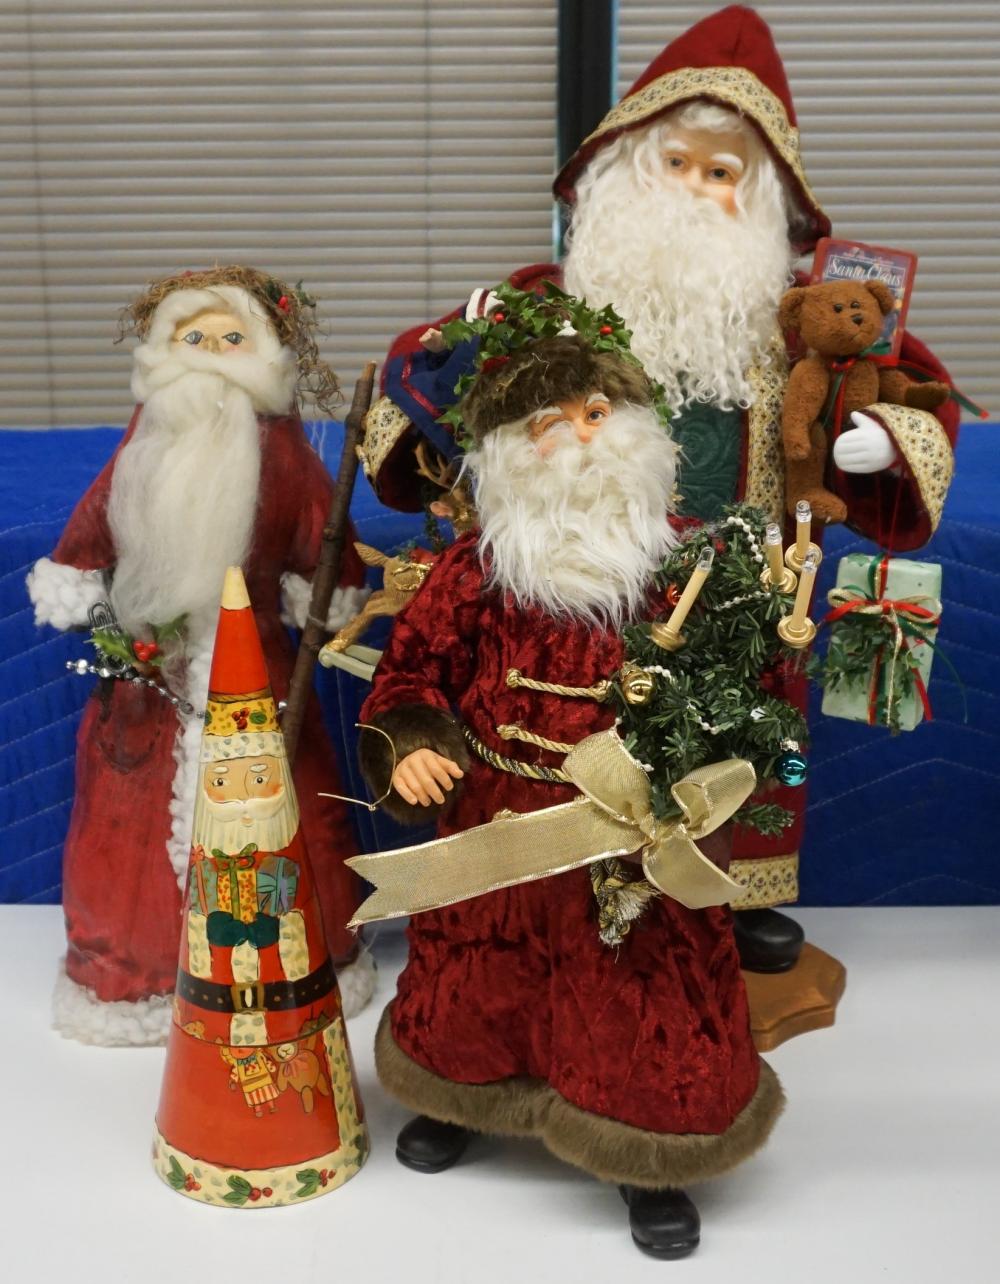 GROUP OF FOUR FIGURES OF SANTA CLAUSGroup